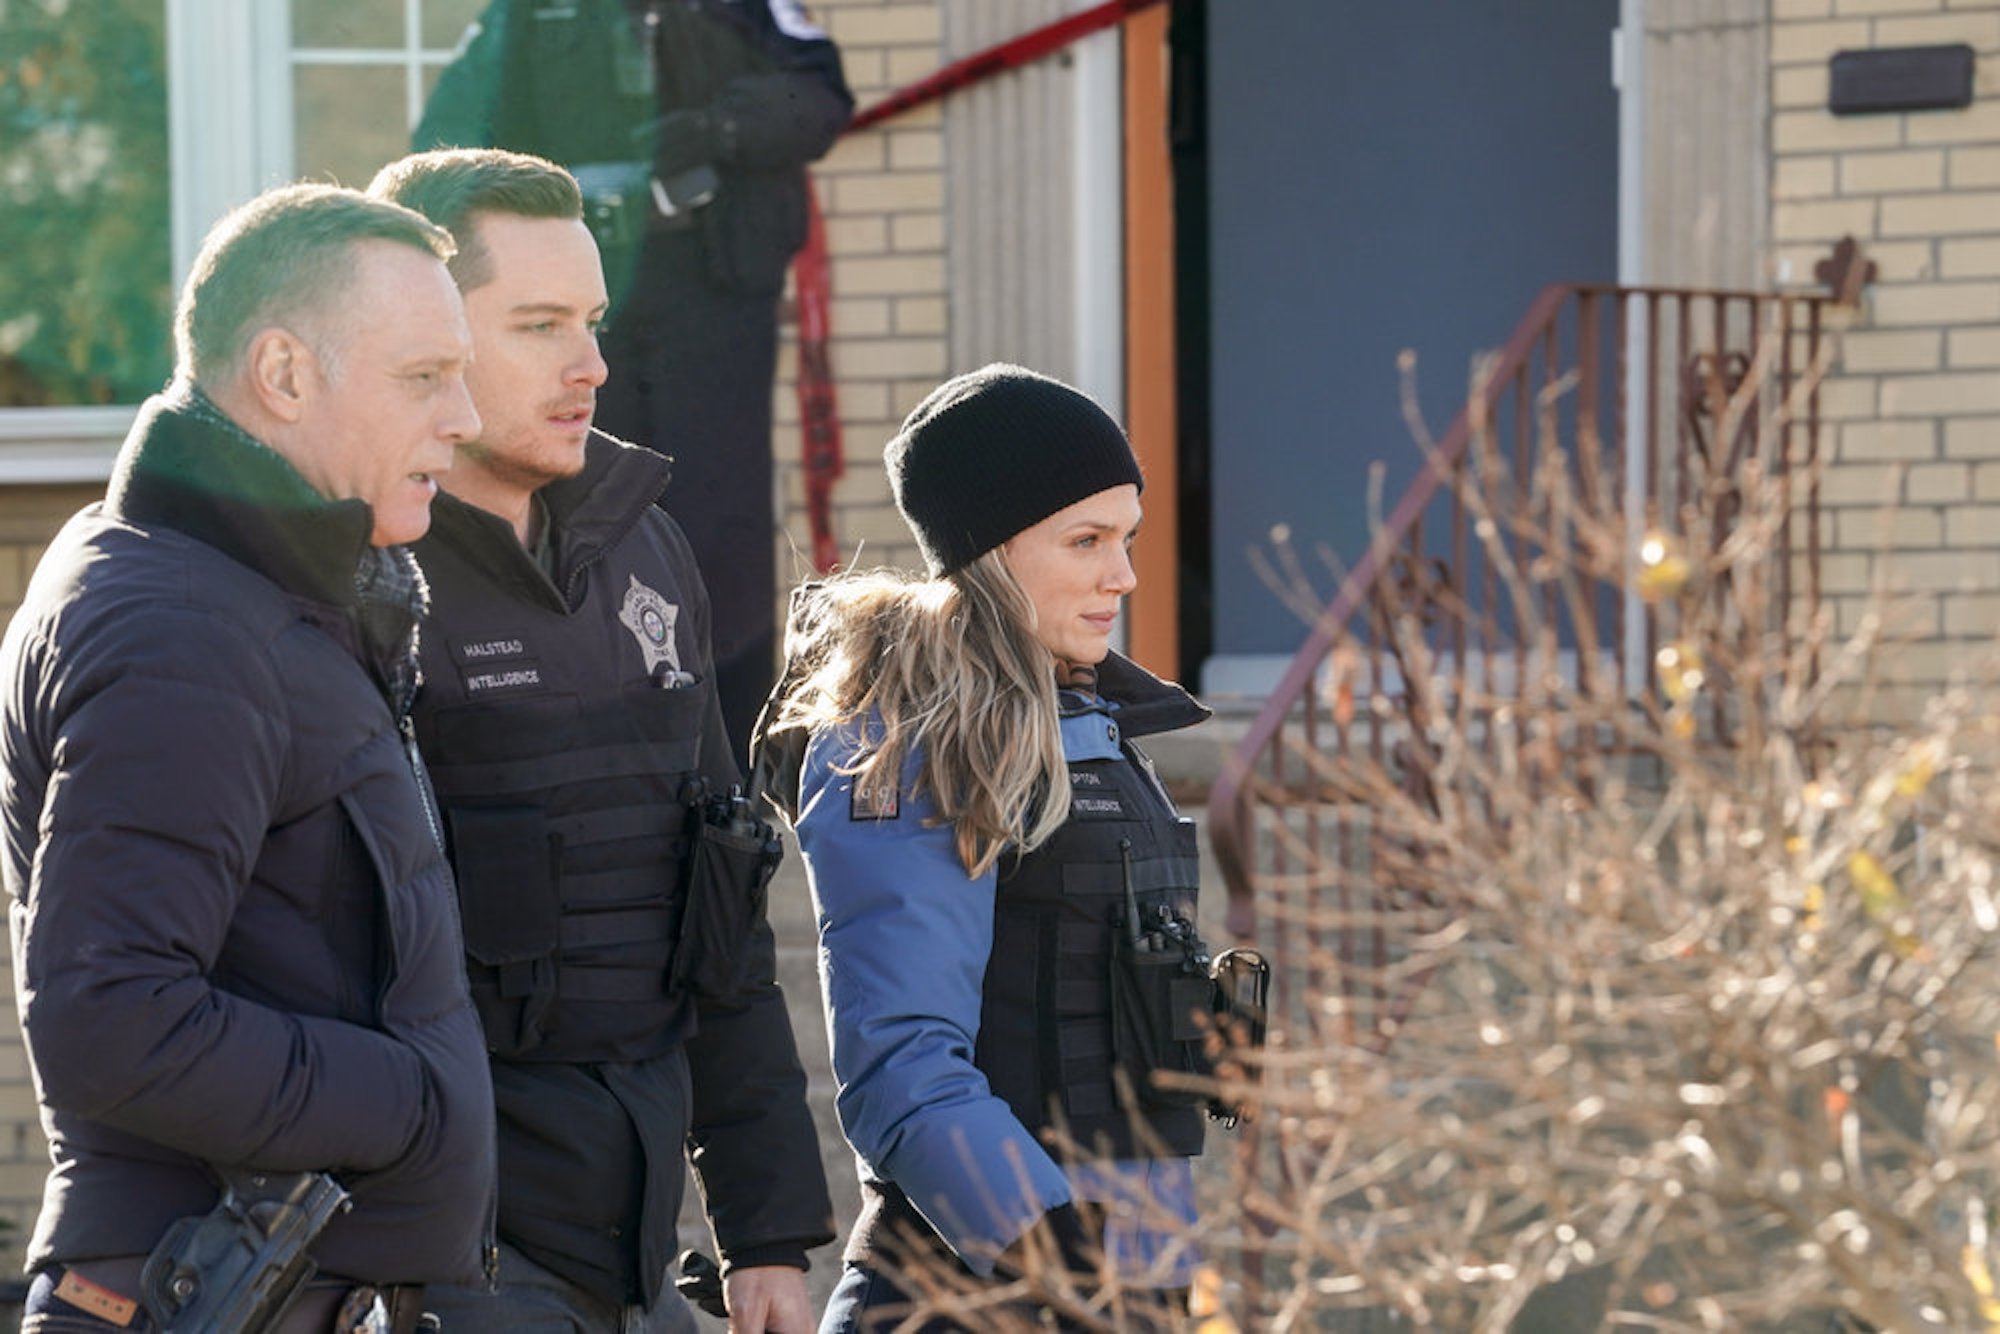 Jason Beghe as Hank Voight, Jesse Lee Soffer as Jay Halstead, and Tracy Spiridakos as Hailey Upton standing together in 'Chicago P.D.' Season 9